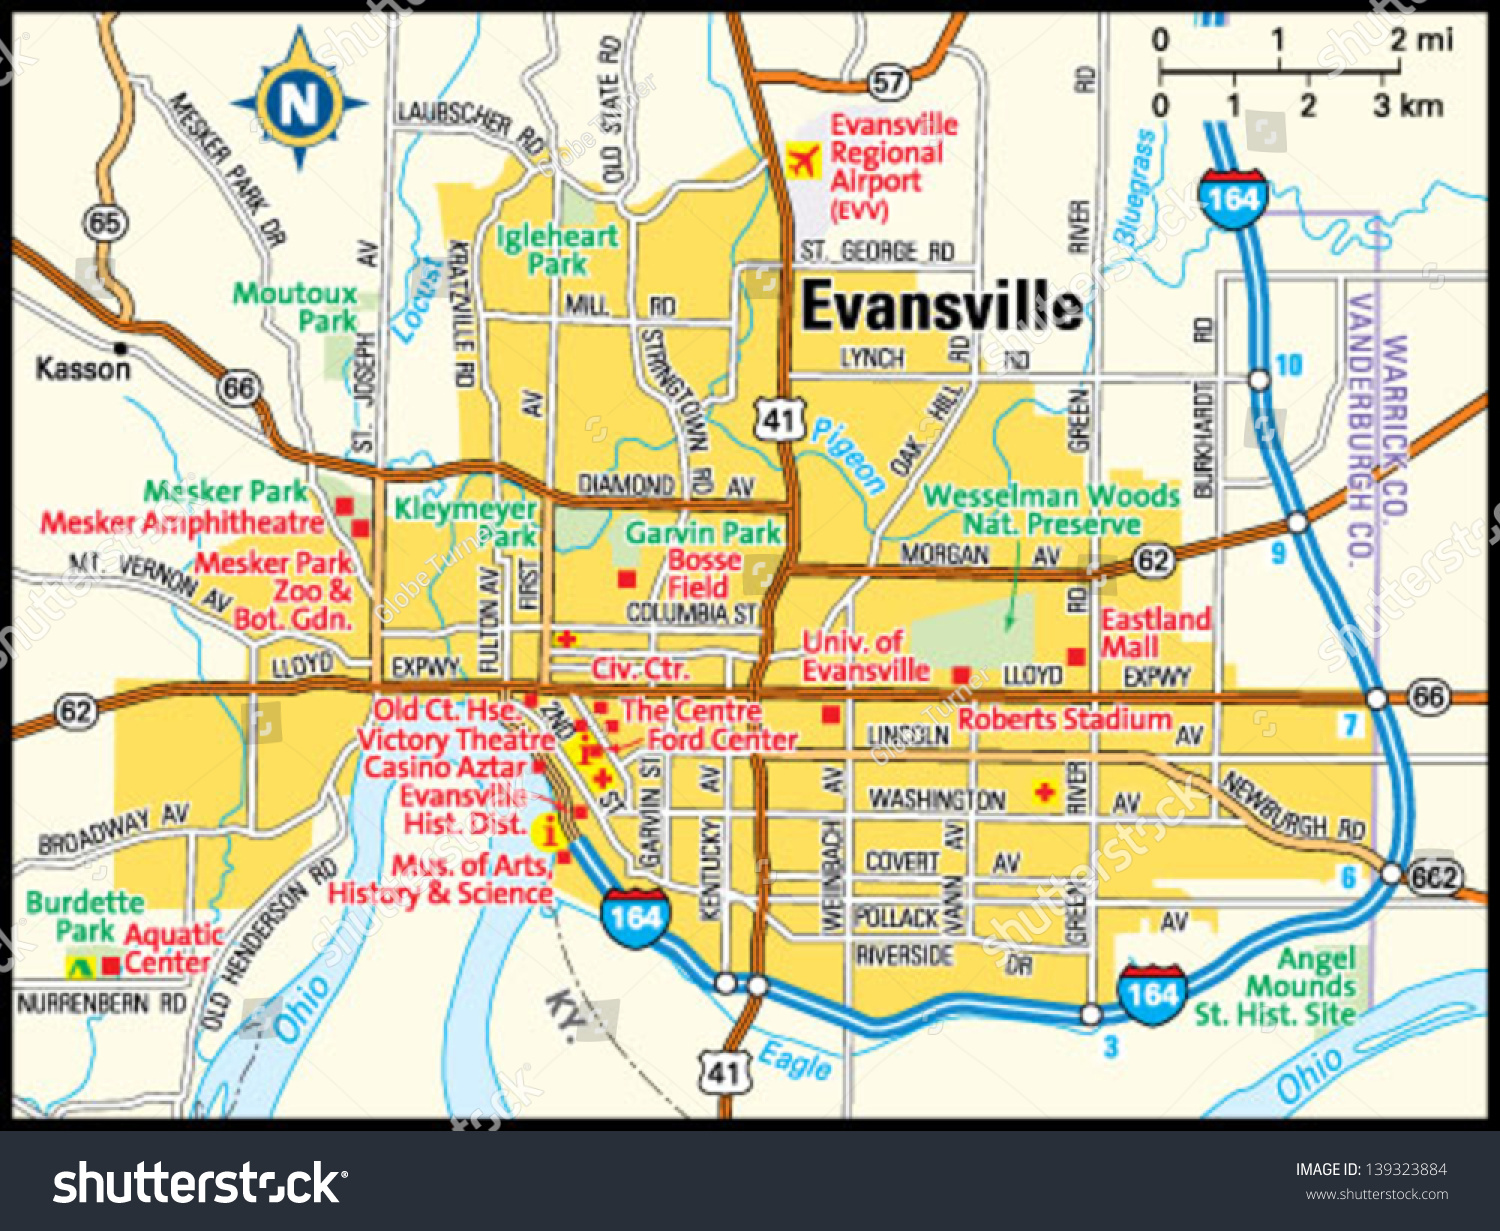 Evansville Indiana Area Map Stock Vector Royalty Free 139323884